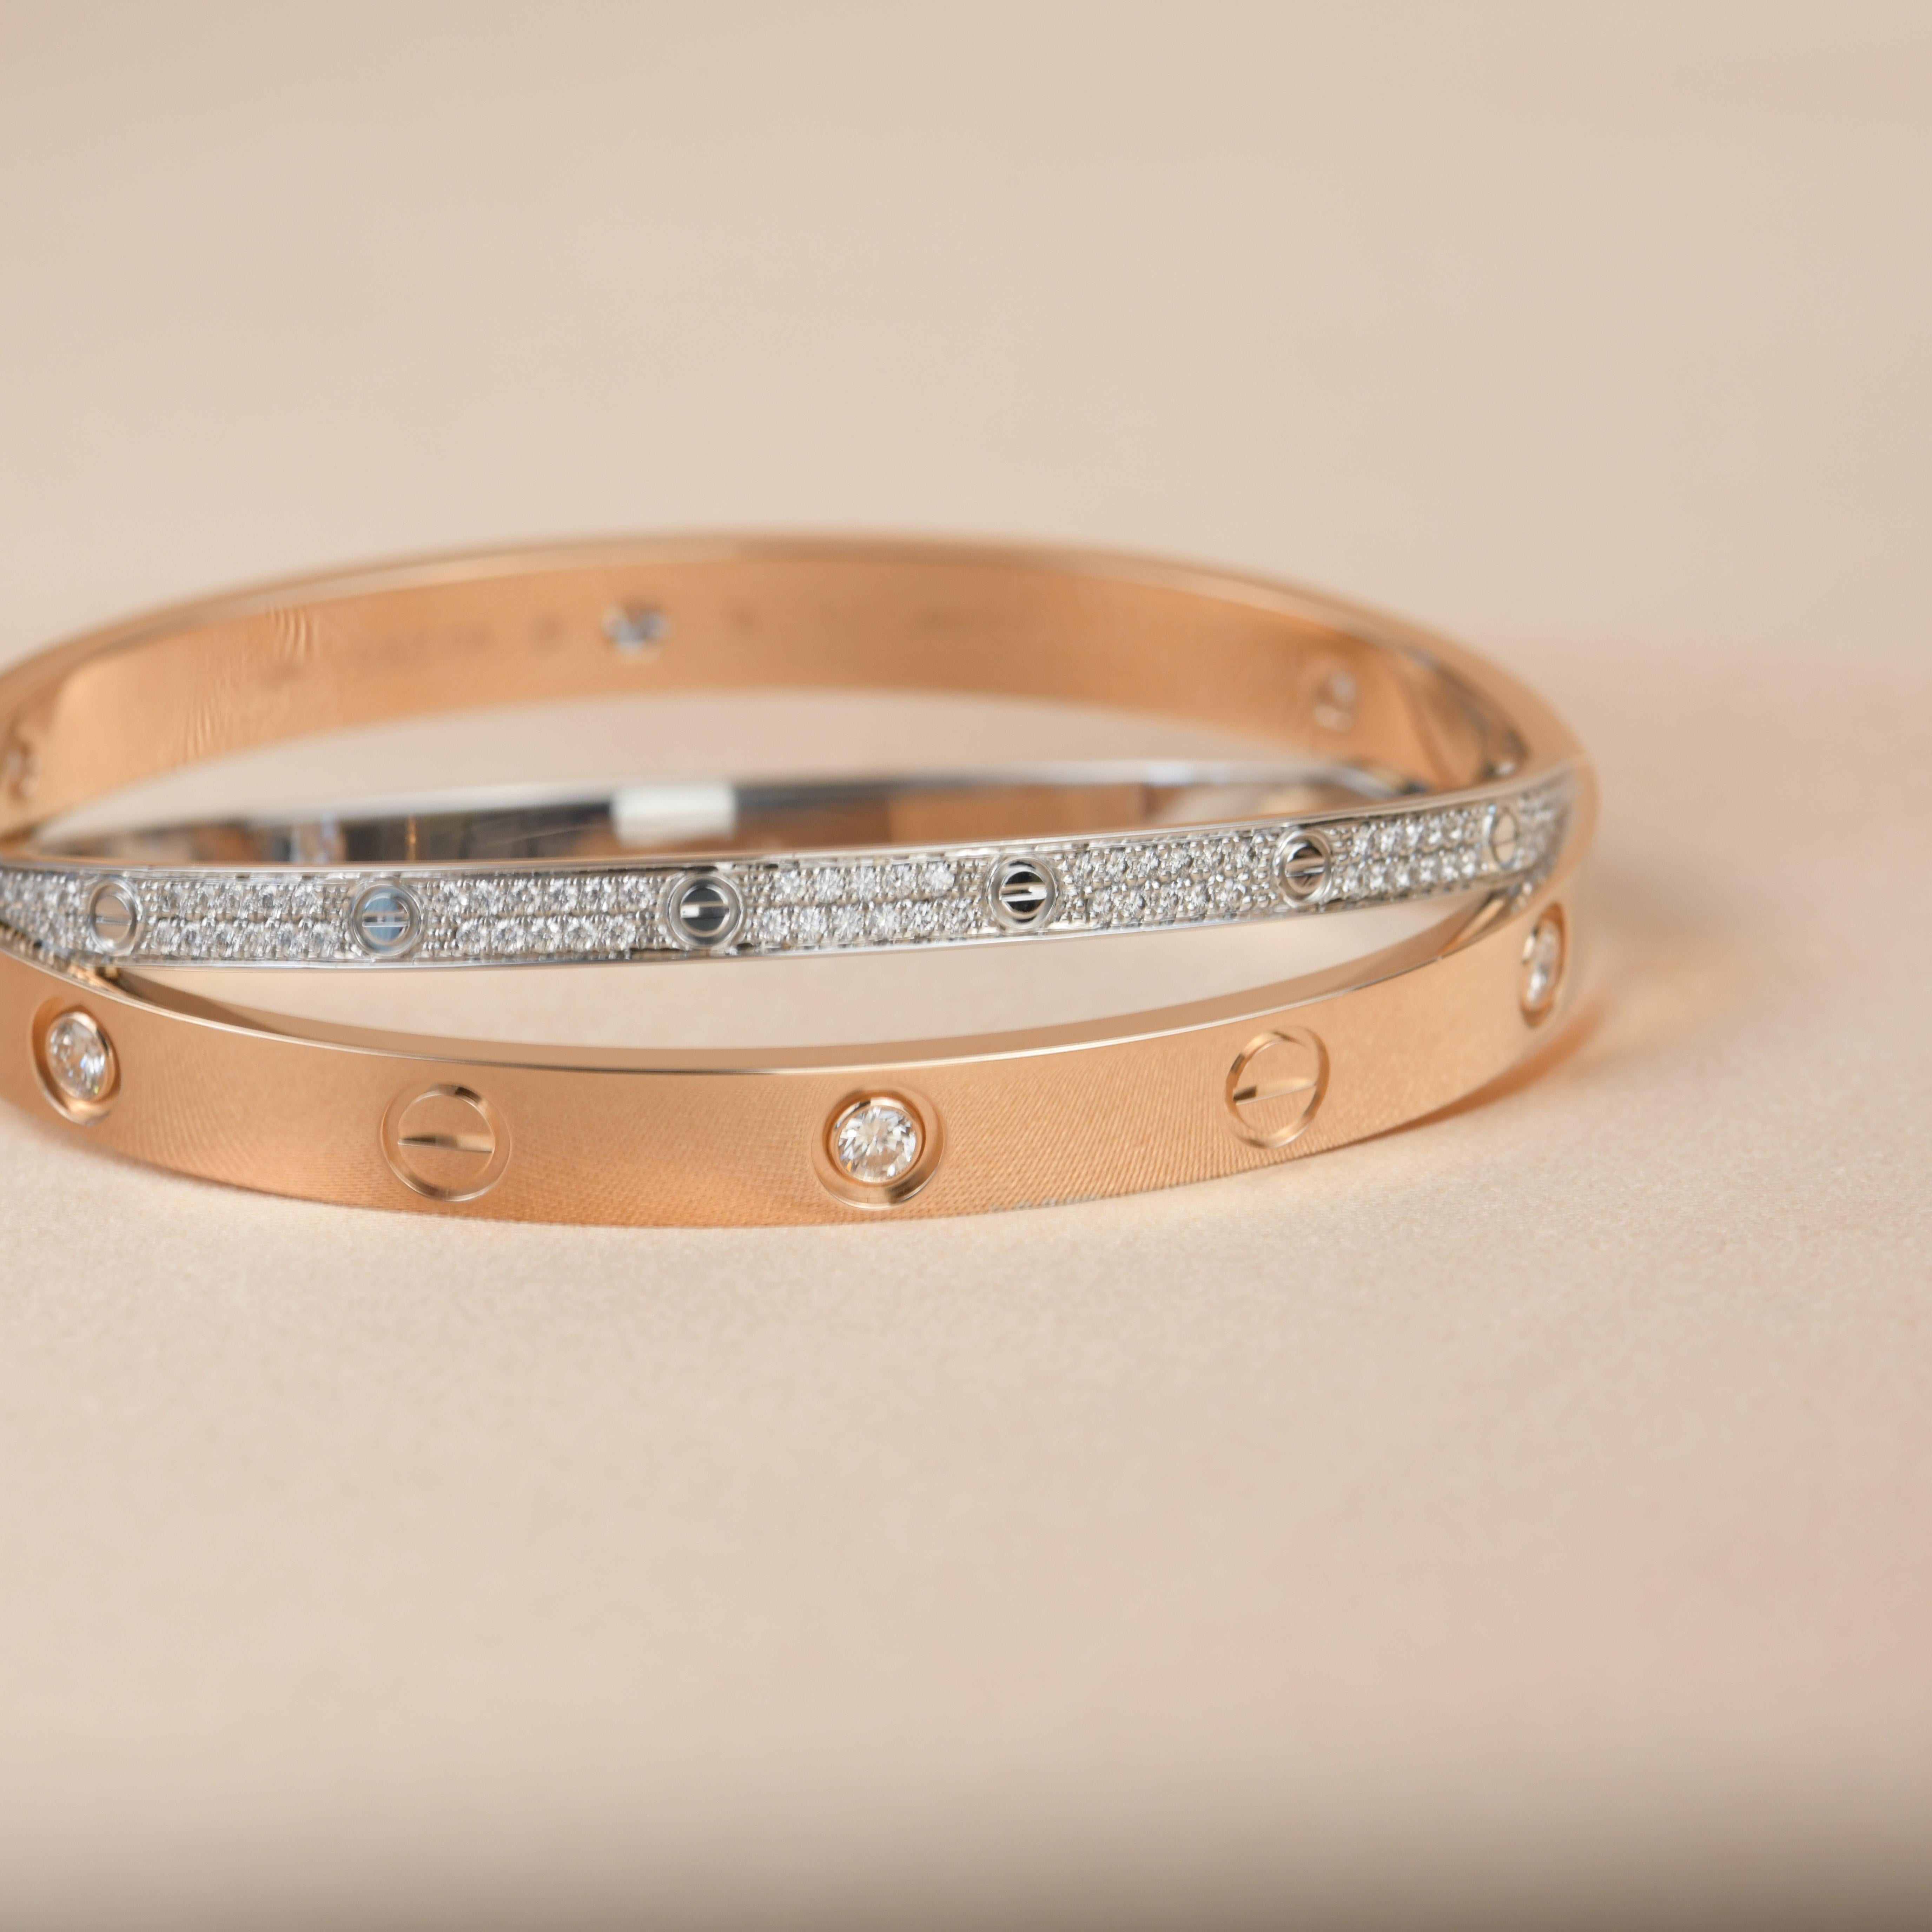 Cartier Love Bracelet Set in Rose and White Gold Pave Diamond 1